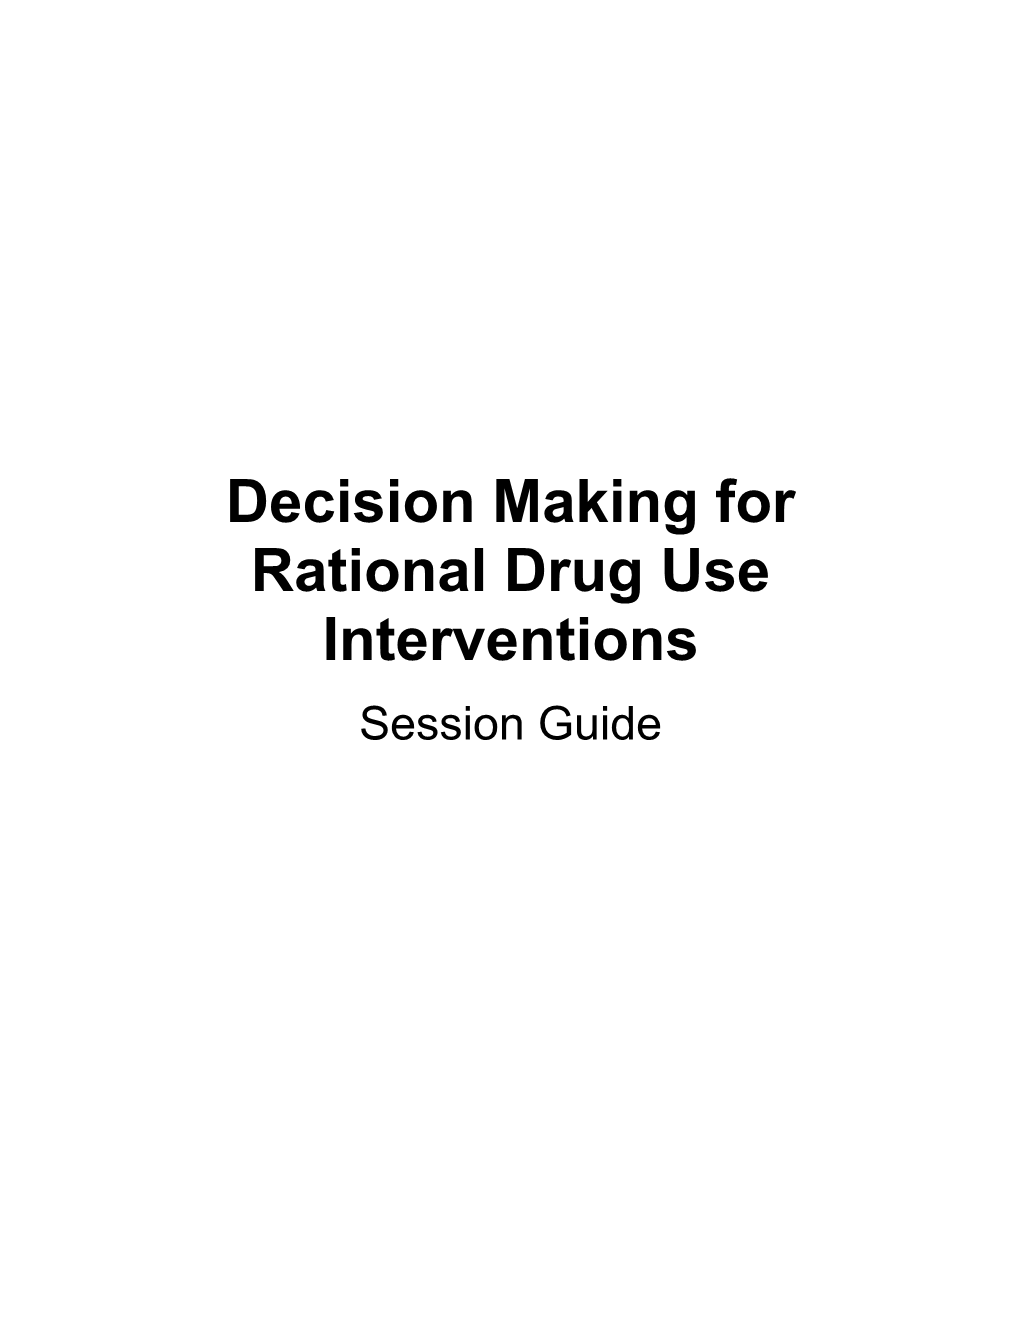 Decision Making for Rational Use Interventions